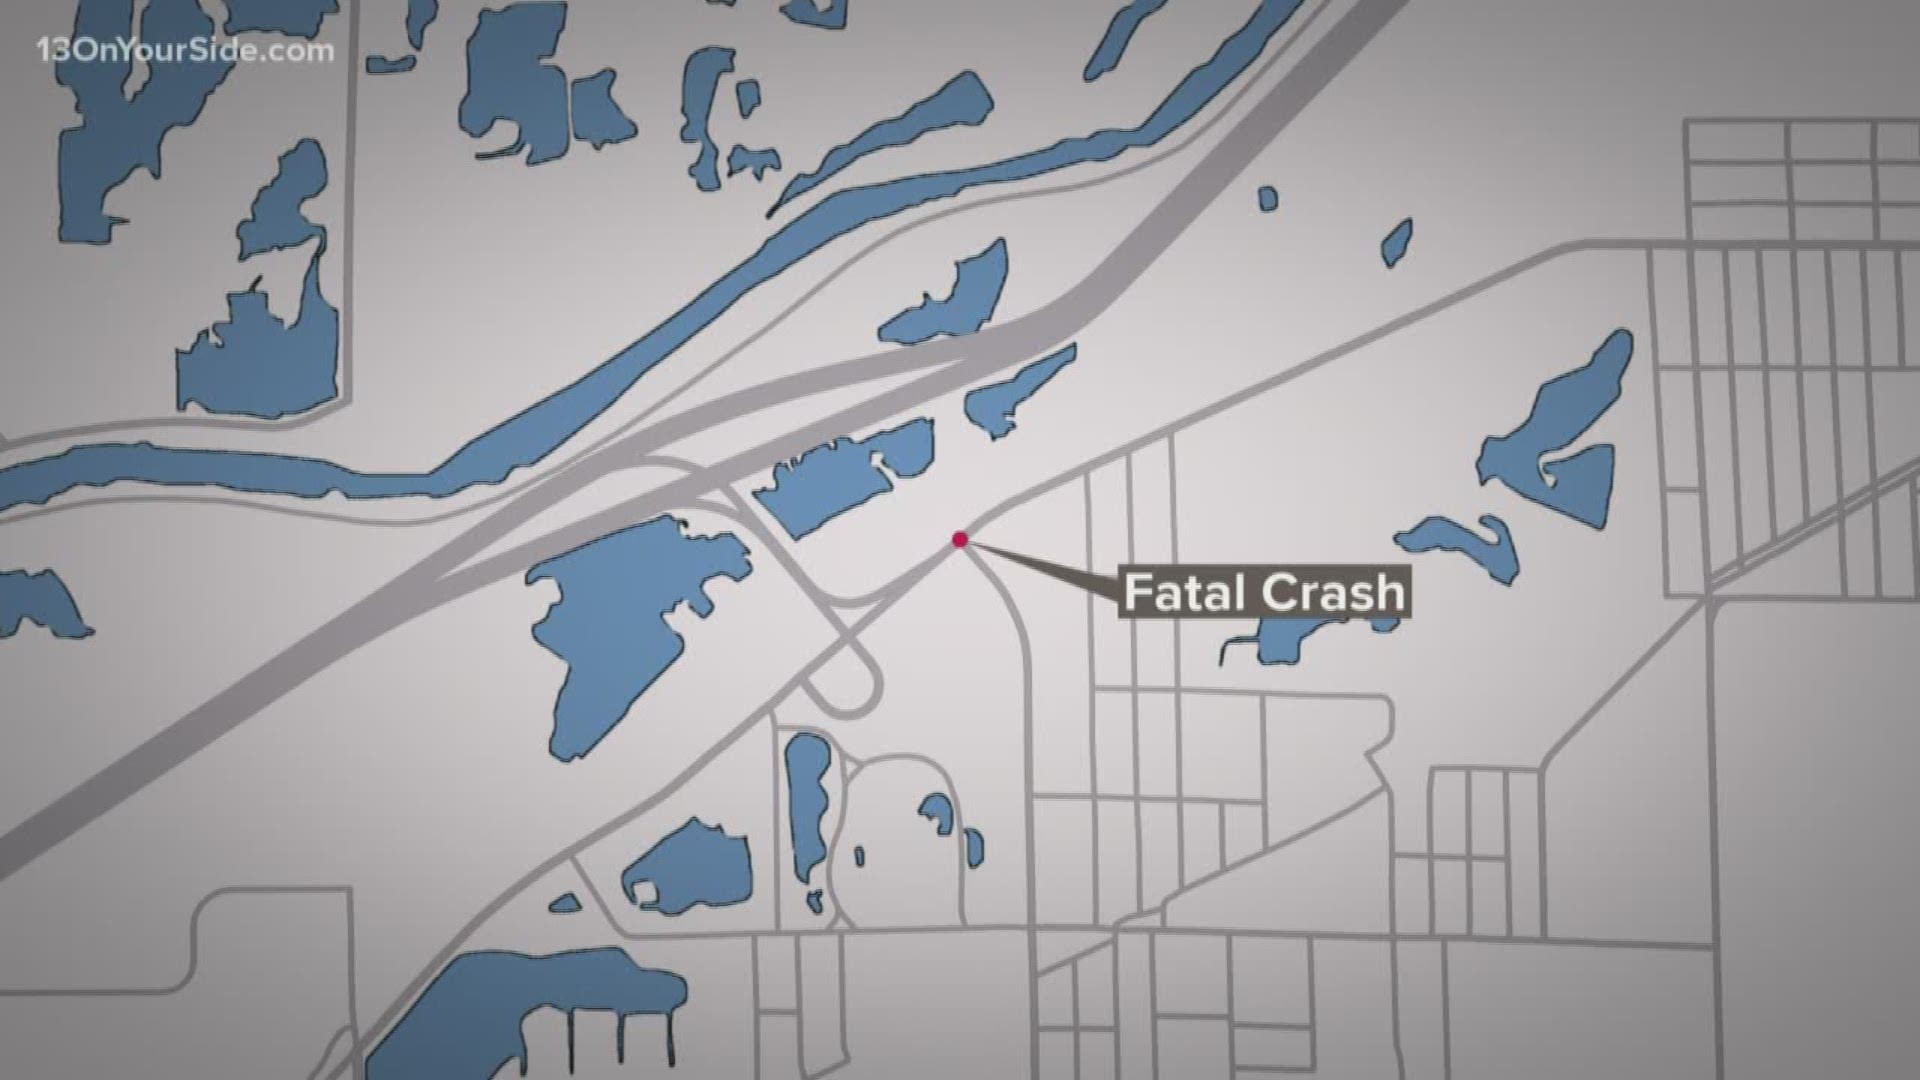 Police in Wyoming are investigating a fatal three-vehicle crash Tuesday morning. Two vehicles collided head-on, causing one of the vehicles to strike a third. One woman was killed in the crash and a second driver was hospitalized.